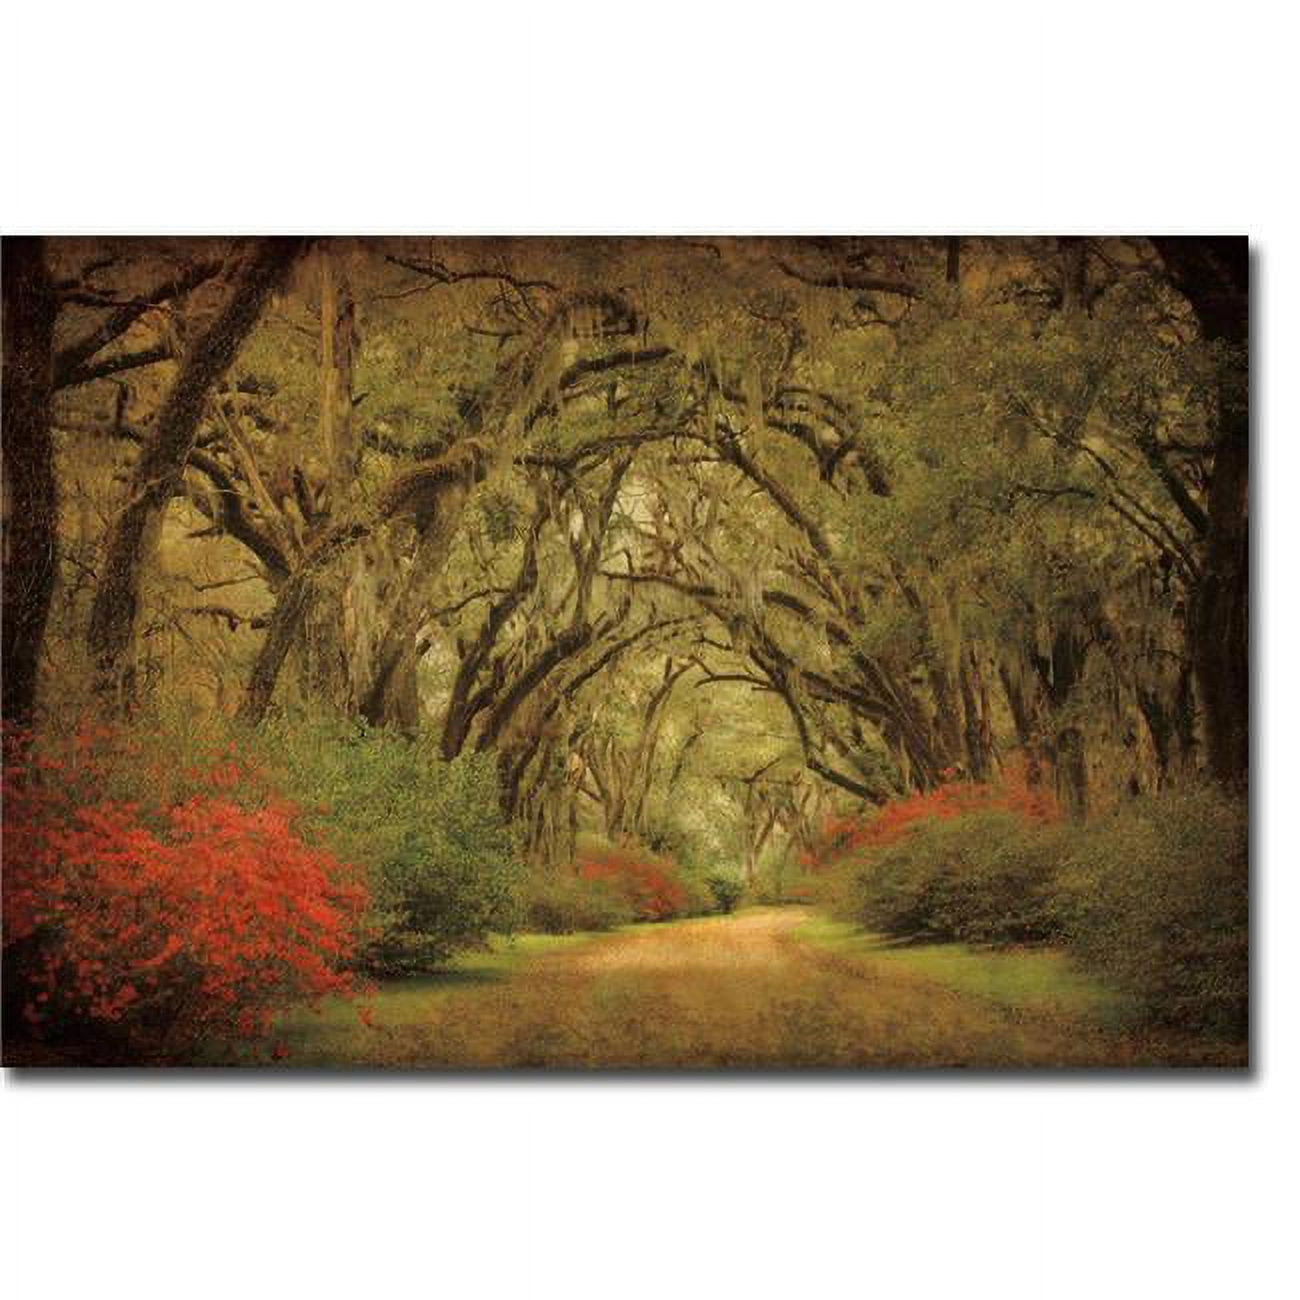 1624y745cg Road Lined With Oaks & Flowers By William Guion Premium Gallery-wrapped Canvas Giclee Art - 16 X 24 X 1.5 In.